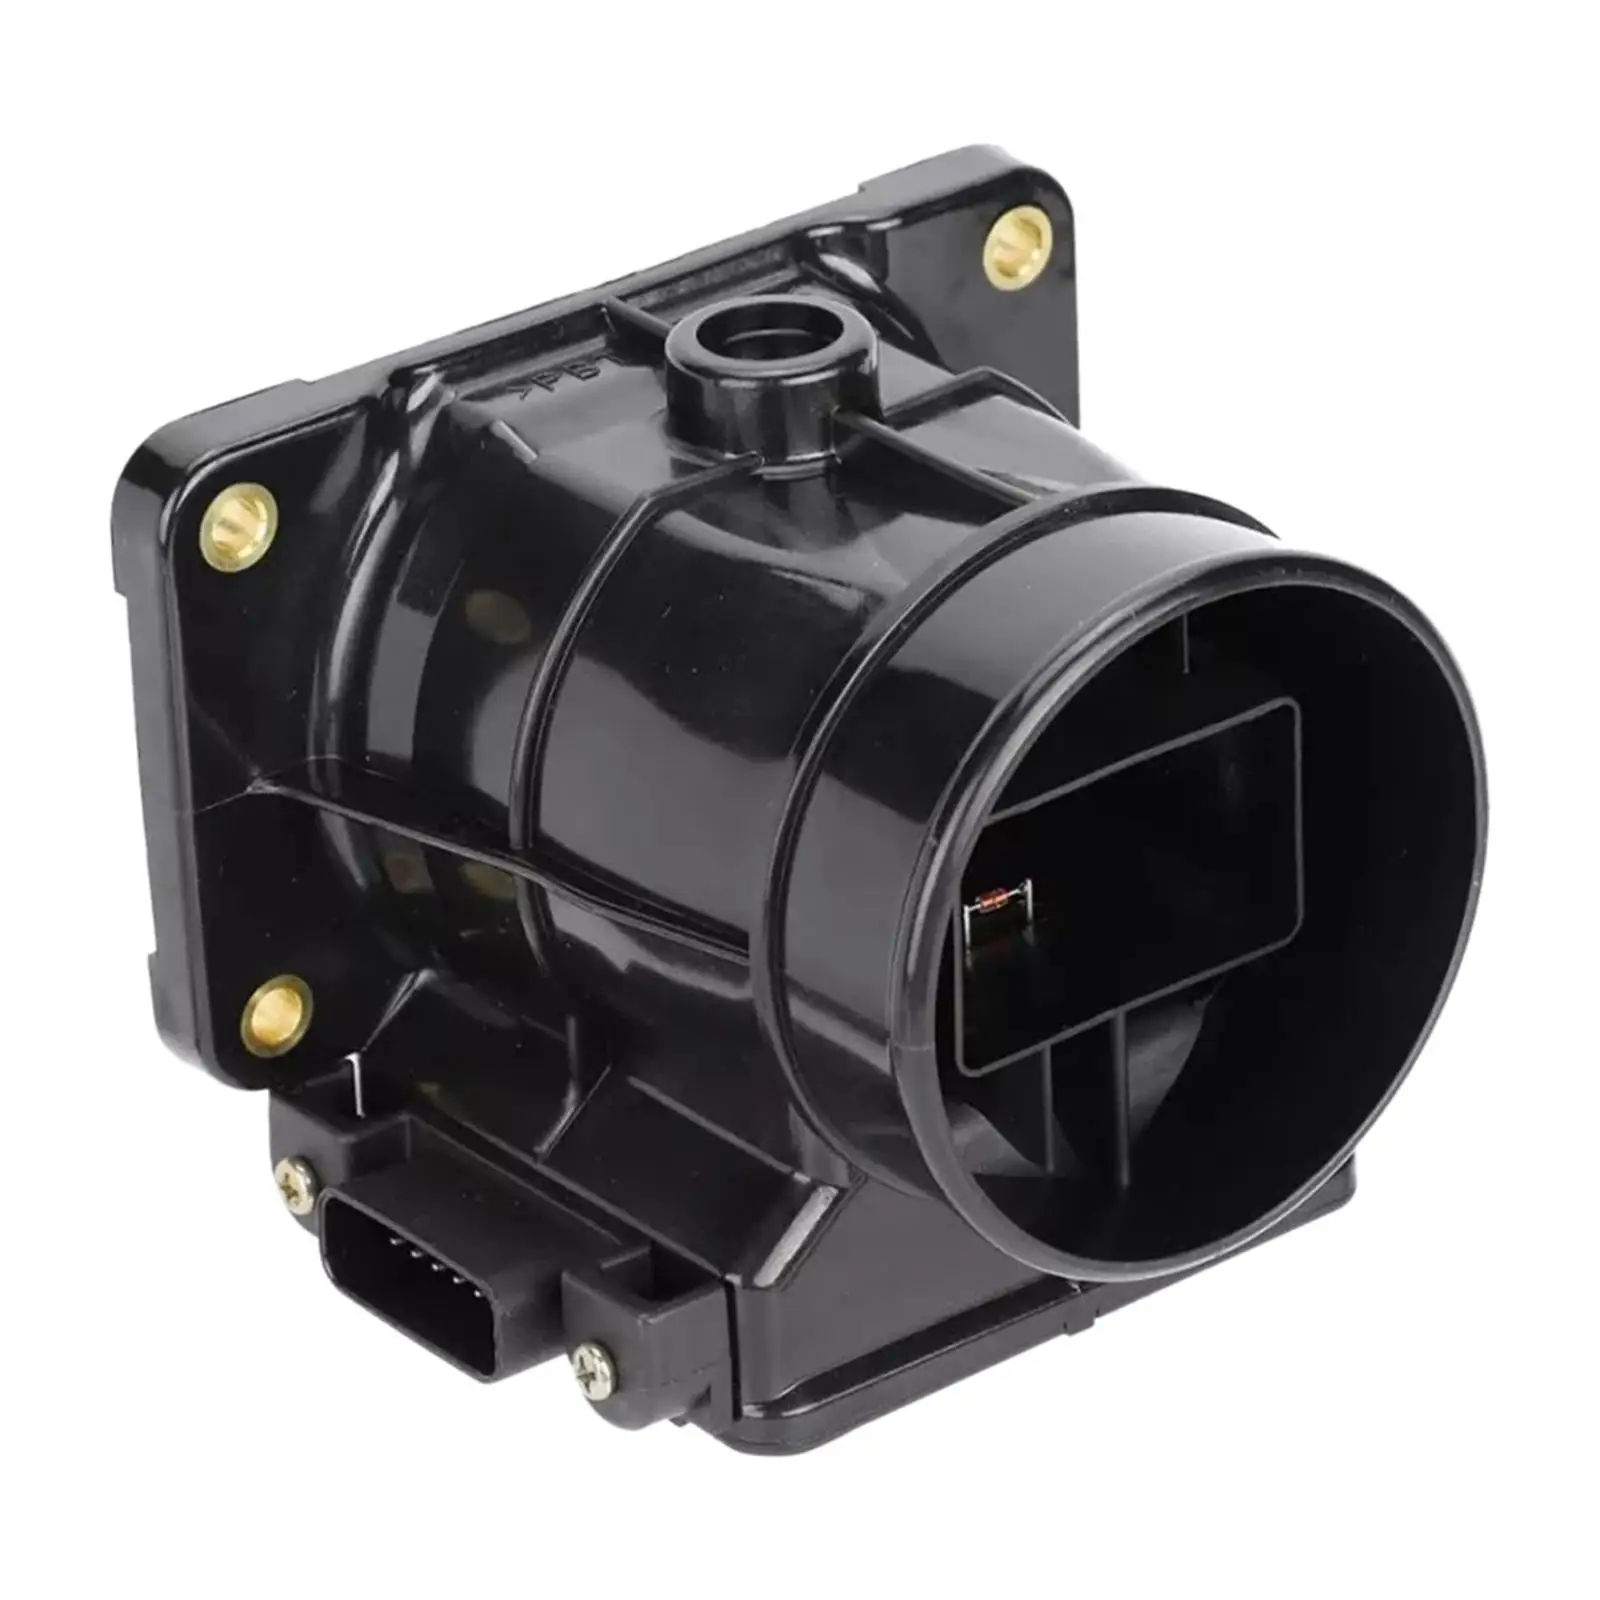 Air Flow Sensor Direct Replaces Accessory 5S2787 for Mitsubishi Dodge Chrysler